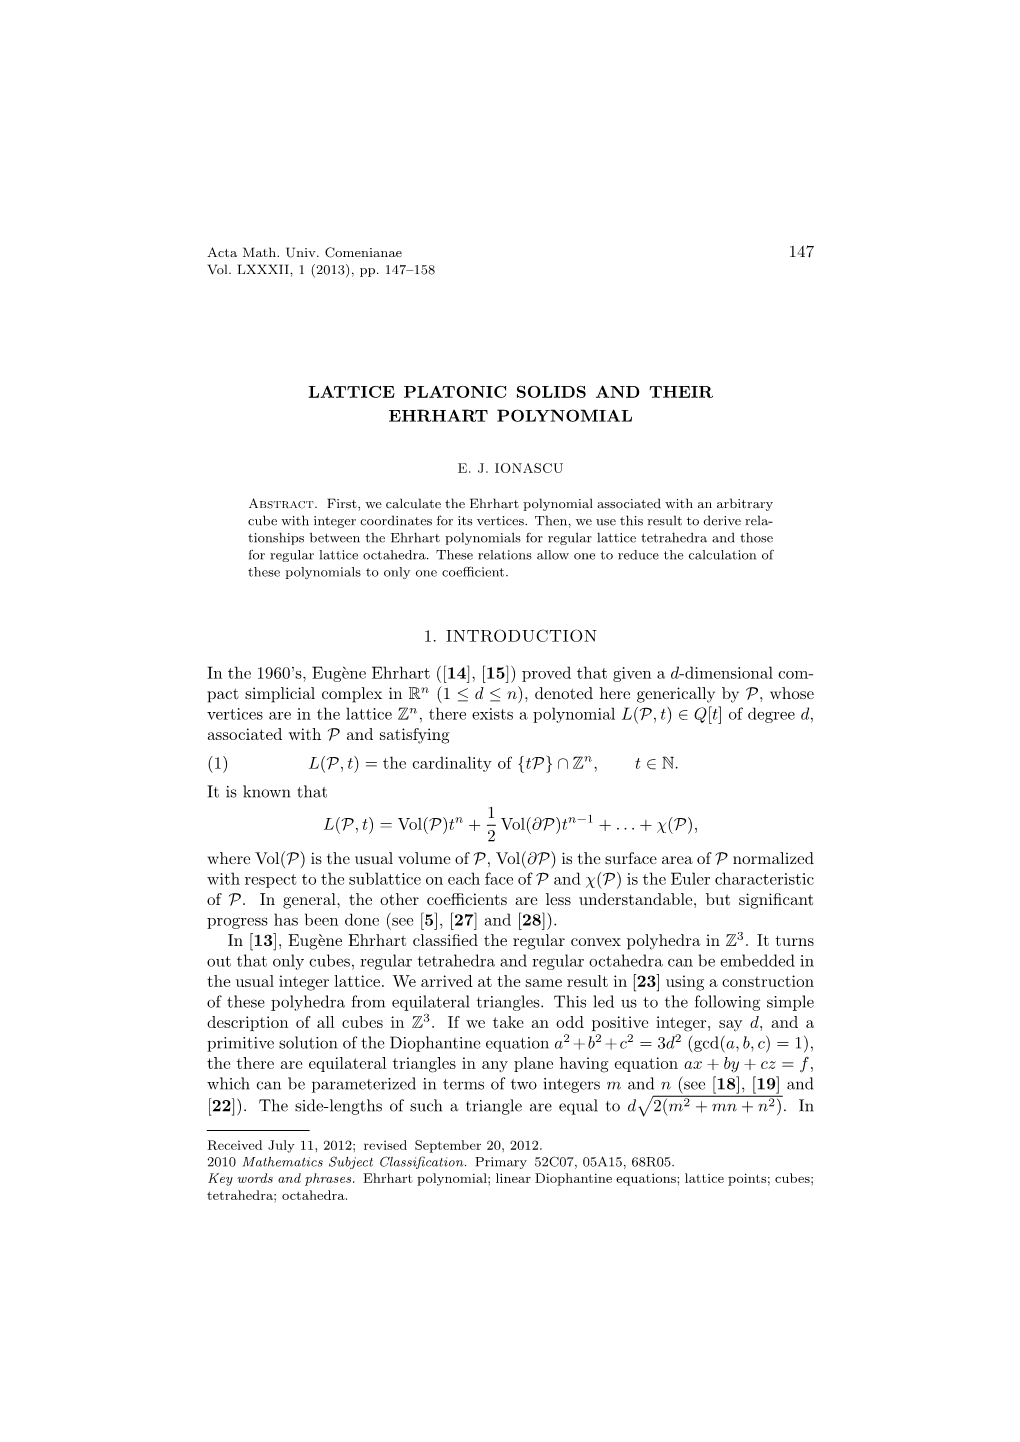 Lattice Platonic Solids and Their Ehrhart Polynomial